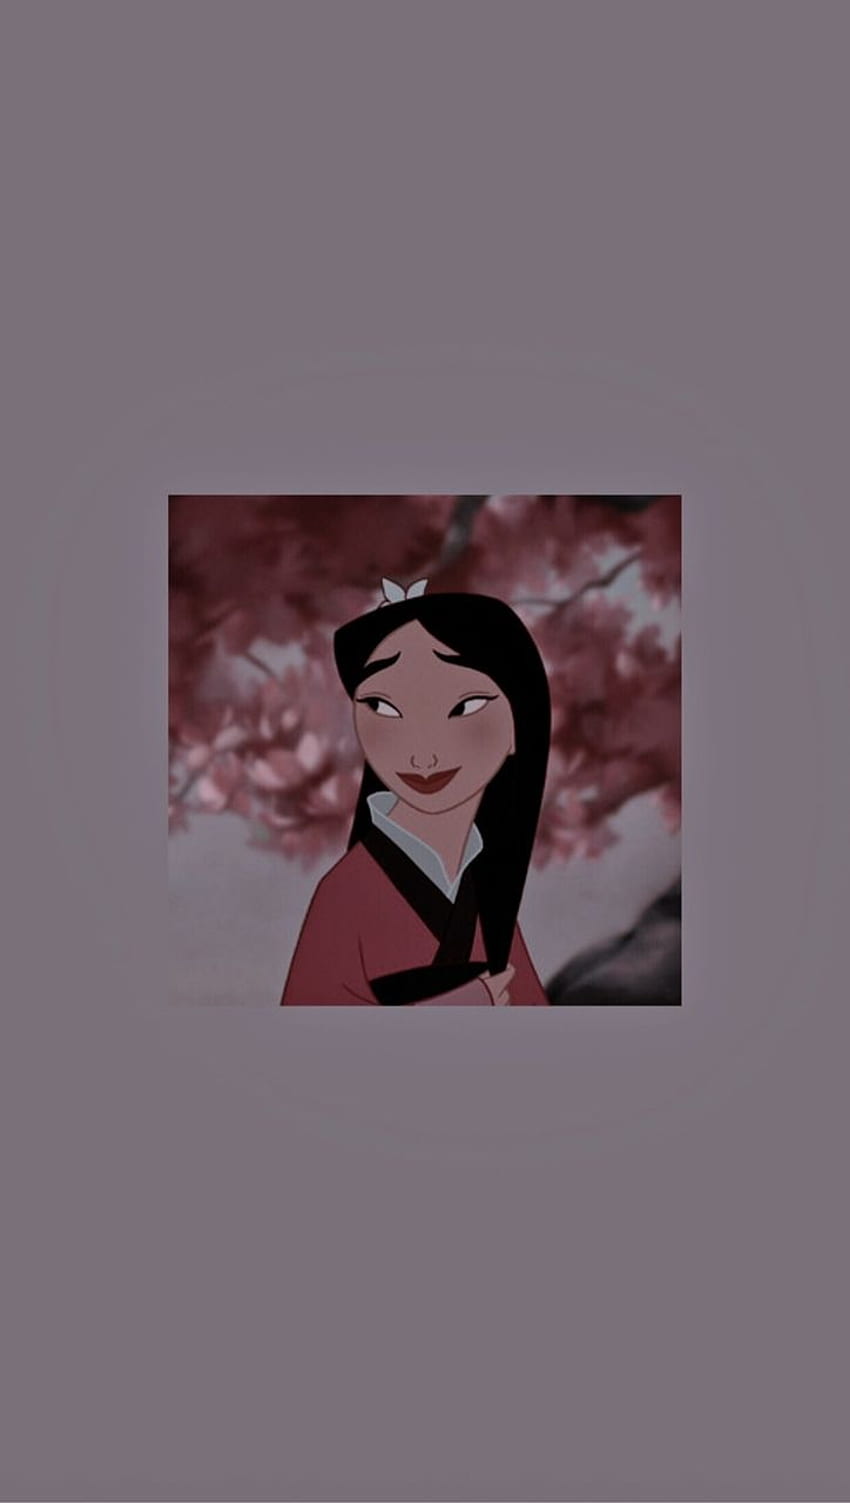 Aesthetic Disney Mulan wallpaper for phone with purple background and Mulan in the center - Princess